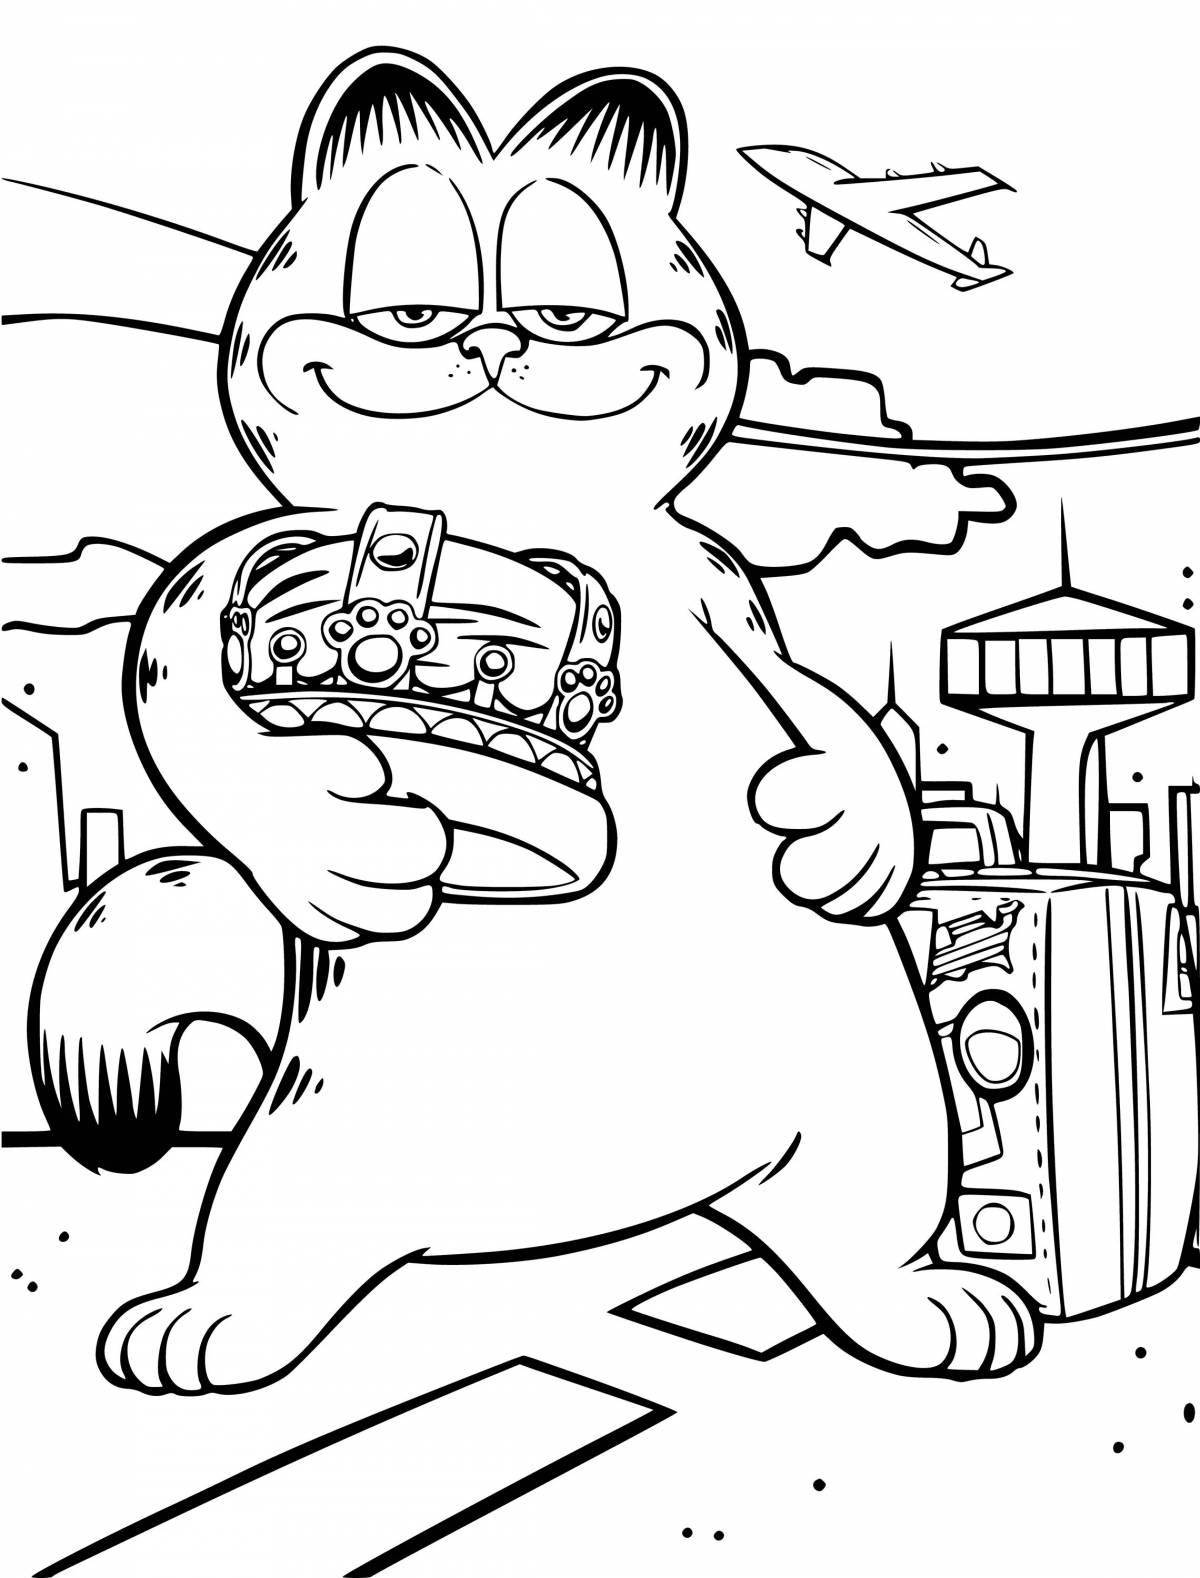 Colouring relaxed fat cat